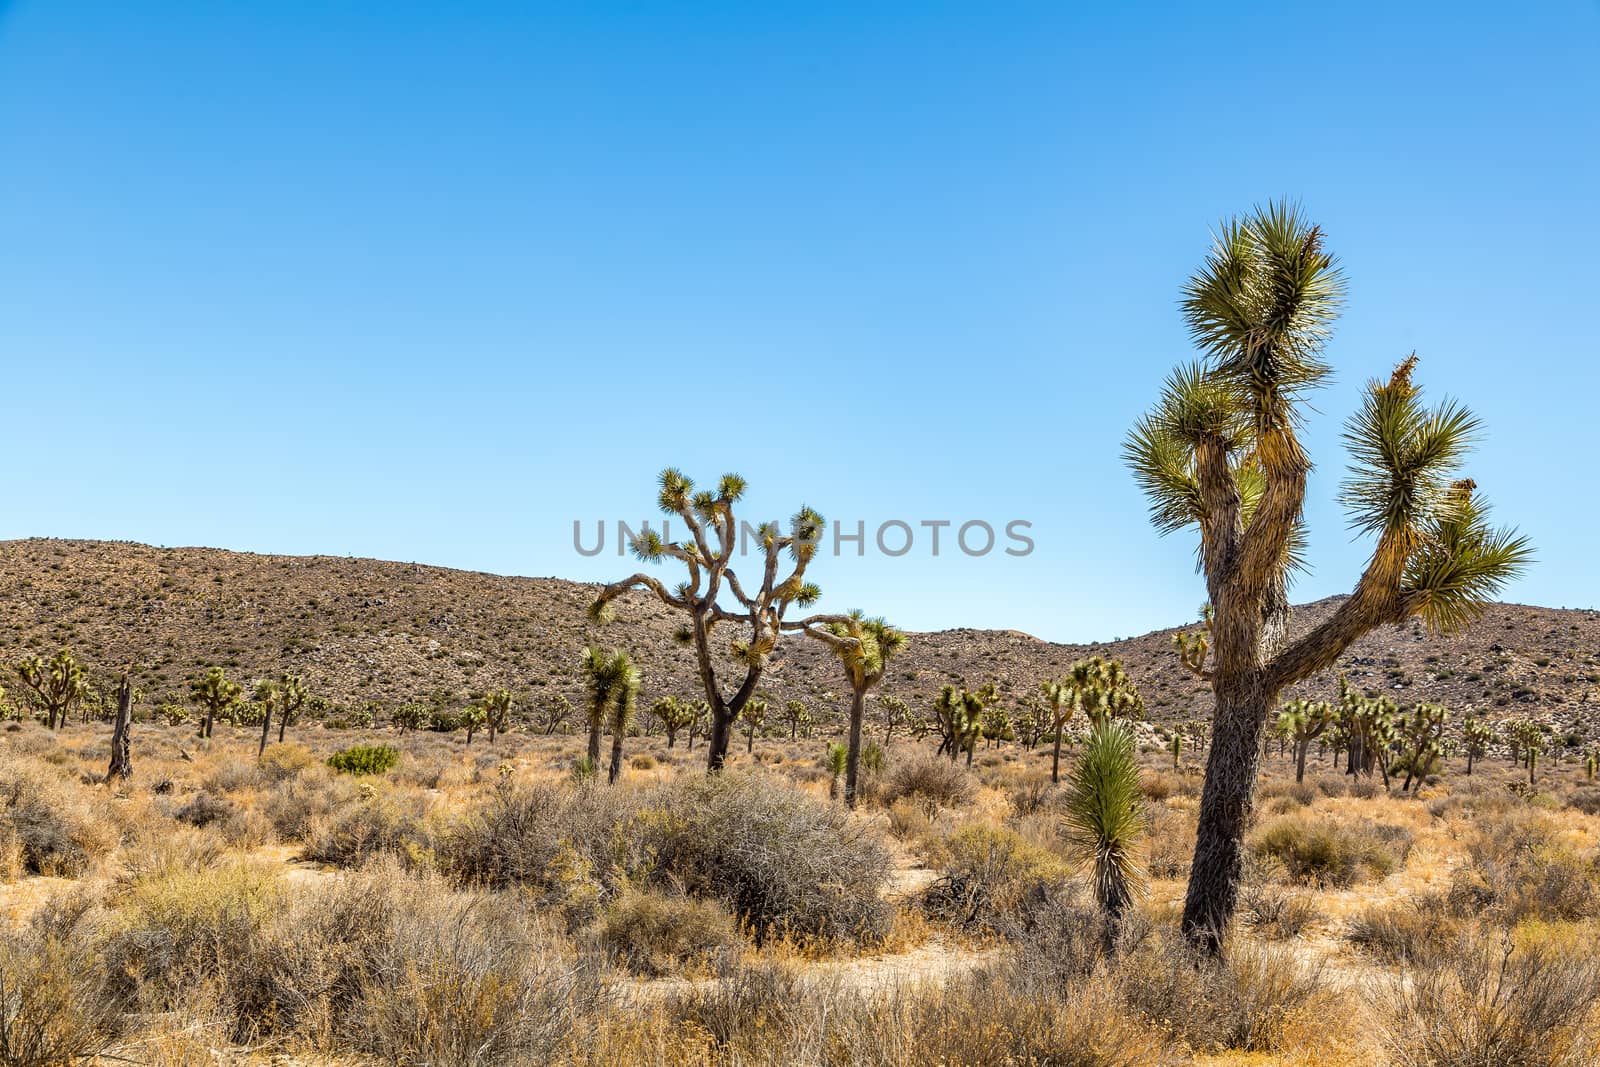 Joshua Tree National Park is a vast protected area in southern California. It's characterized by rugged rock formations and stark desert landscapes.